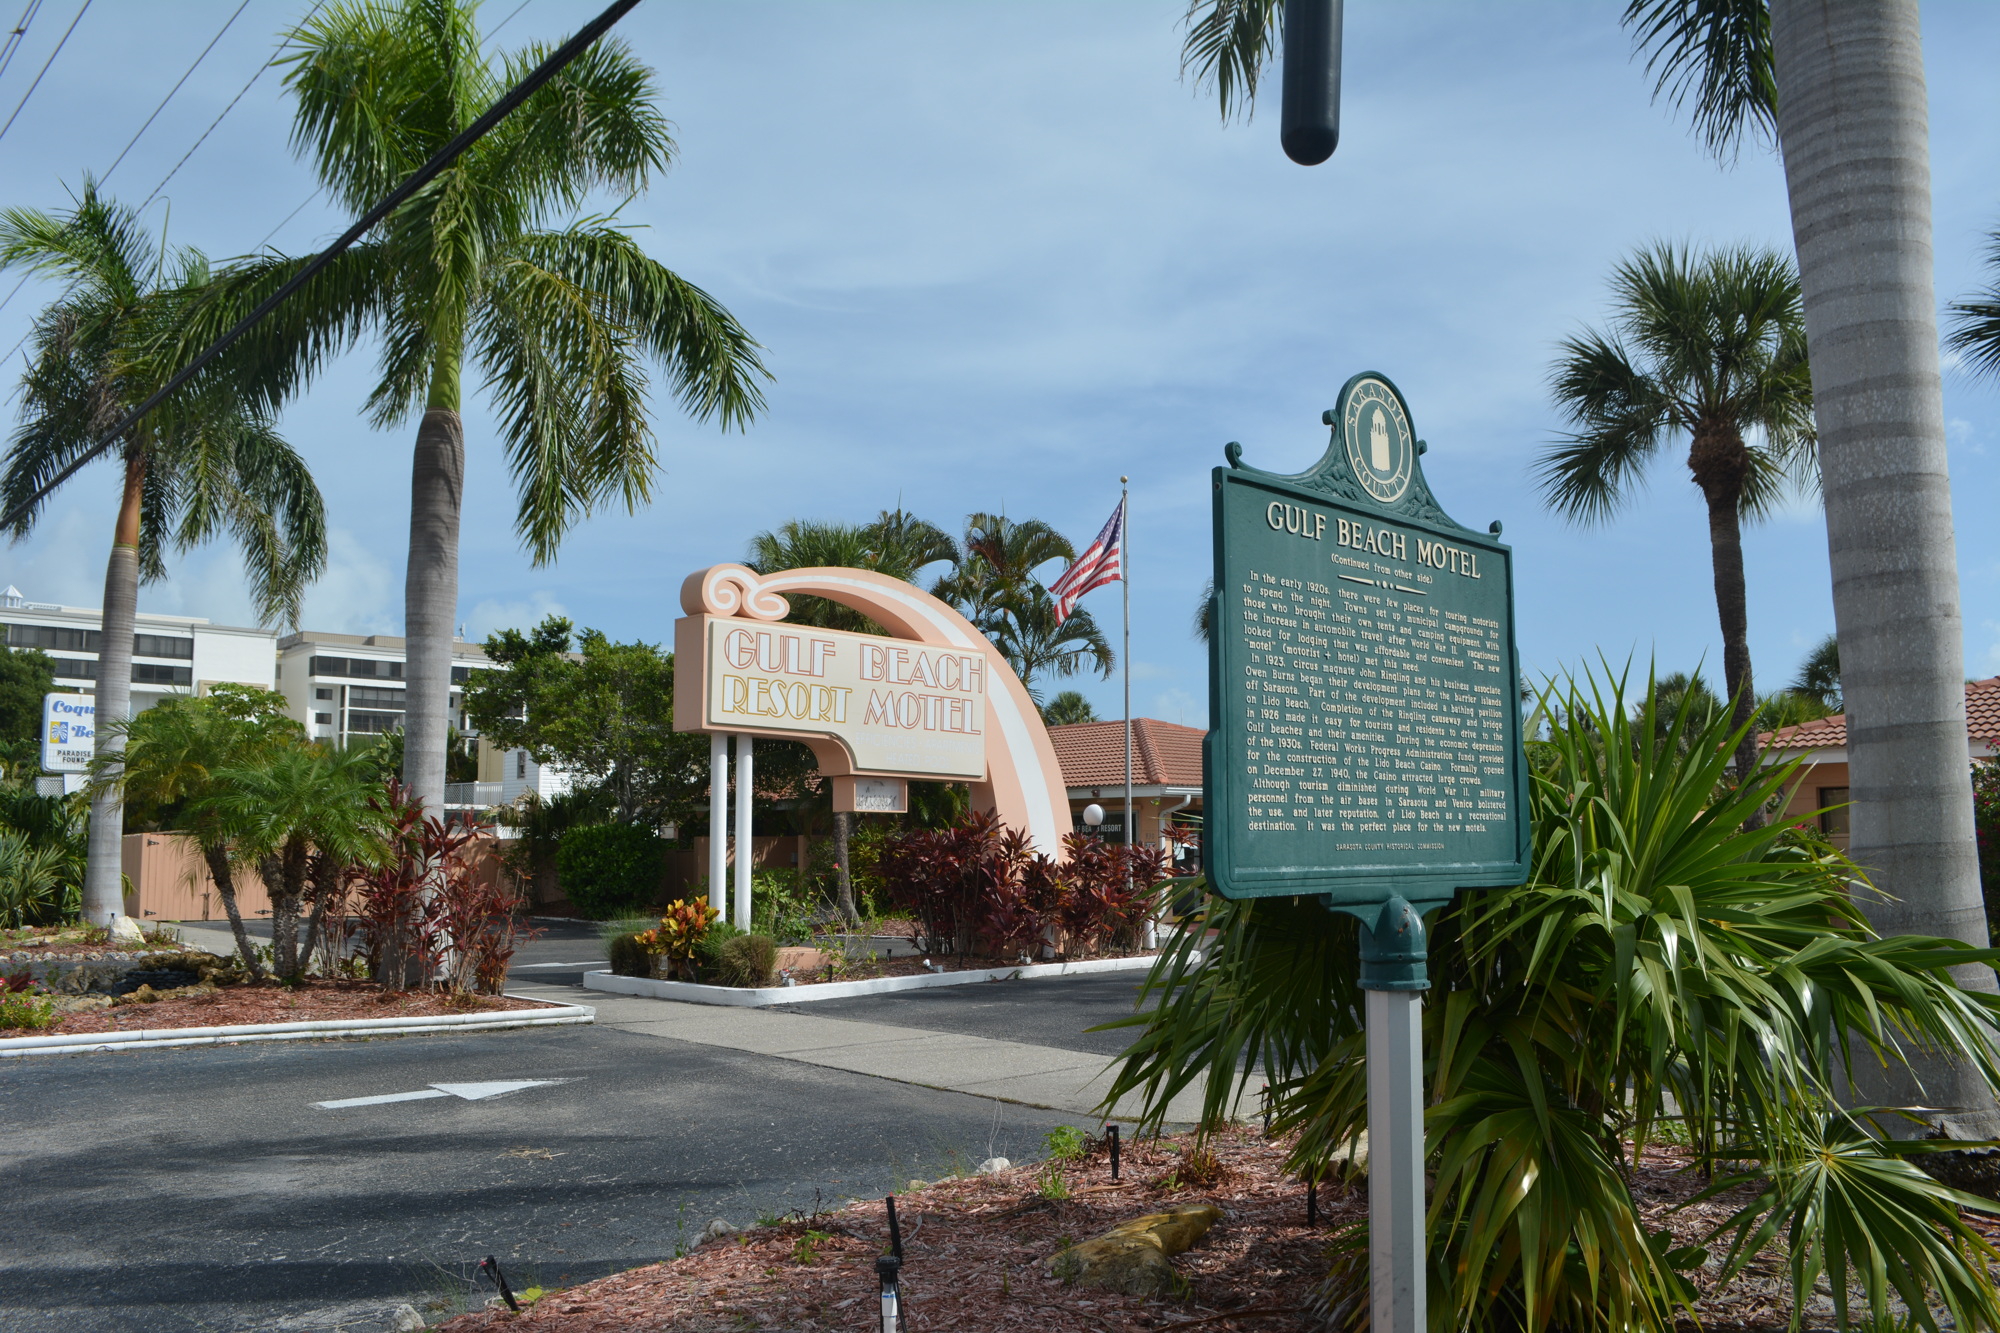 A county historical marker outside the Gulf Beach Motel notes the complex’s status as the first in a series of post-World War II motels on the beach.